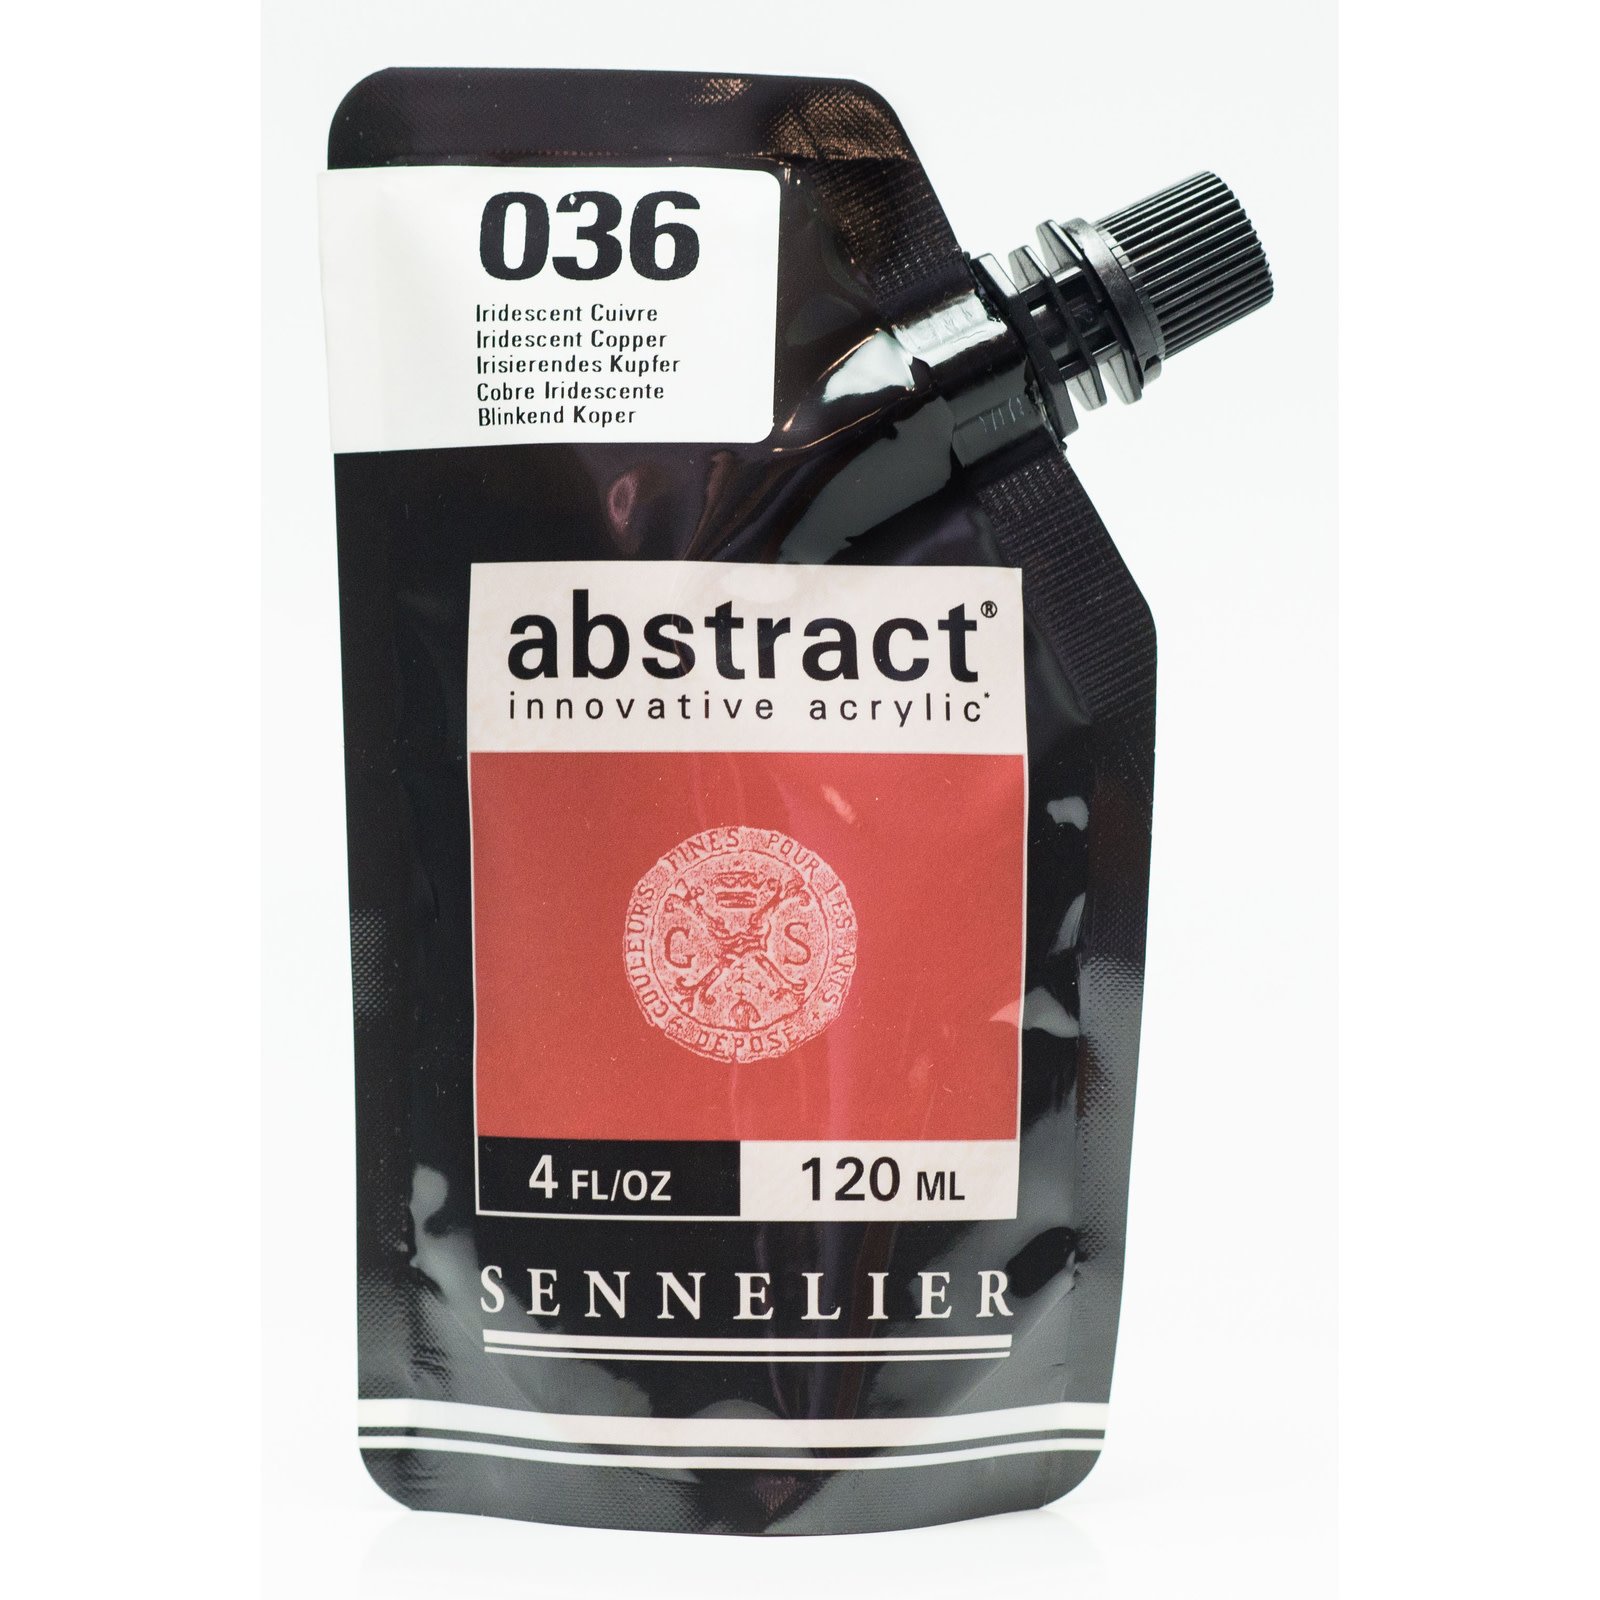 Sennelier Abstract Acrylics - 120ML Iridescent Copper